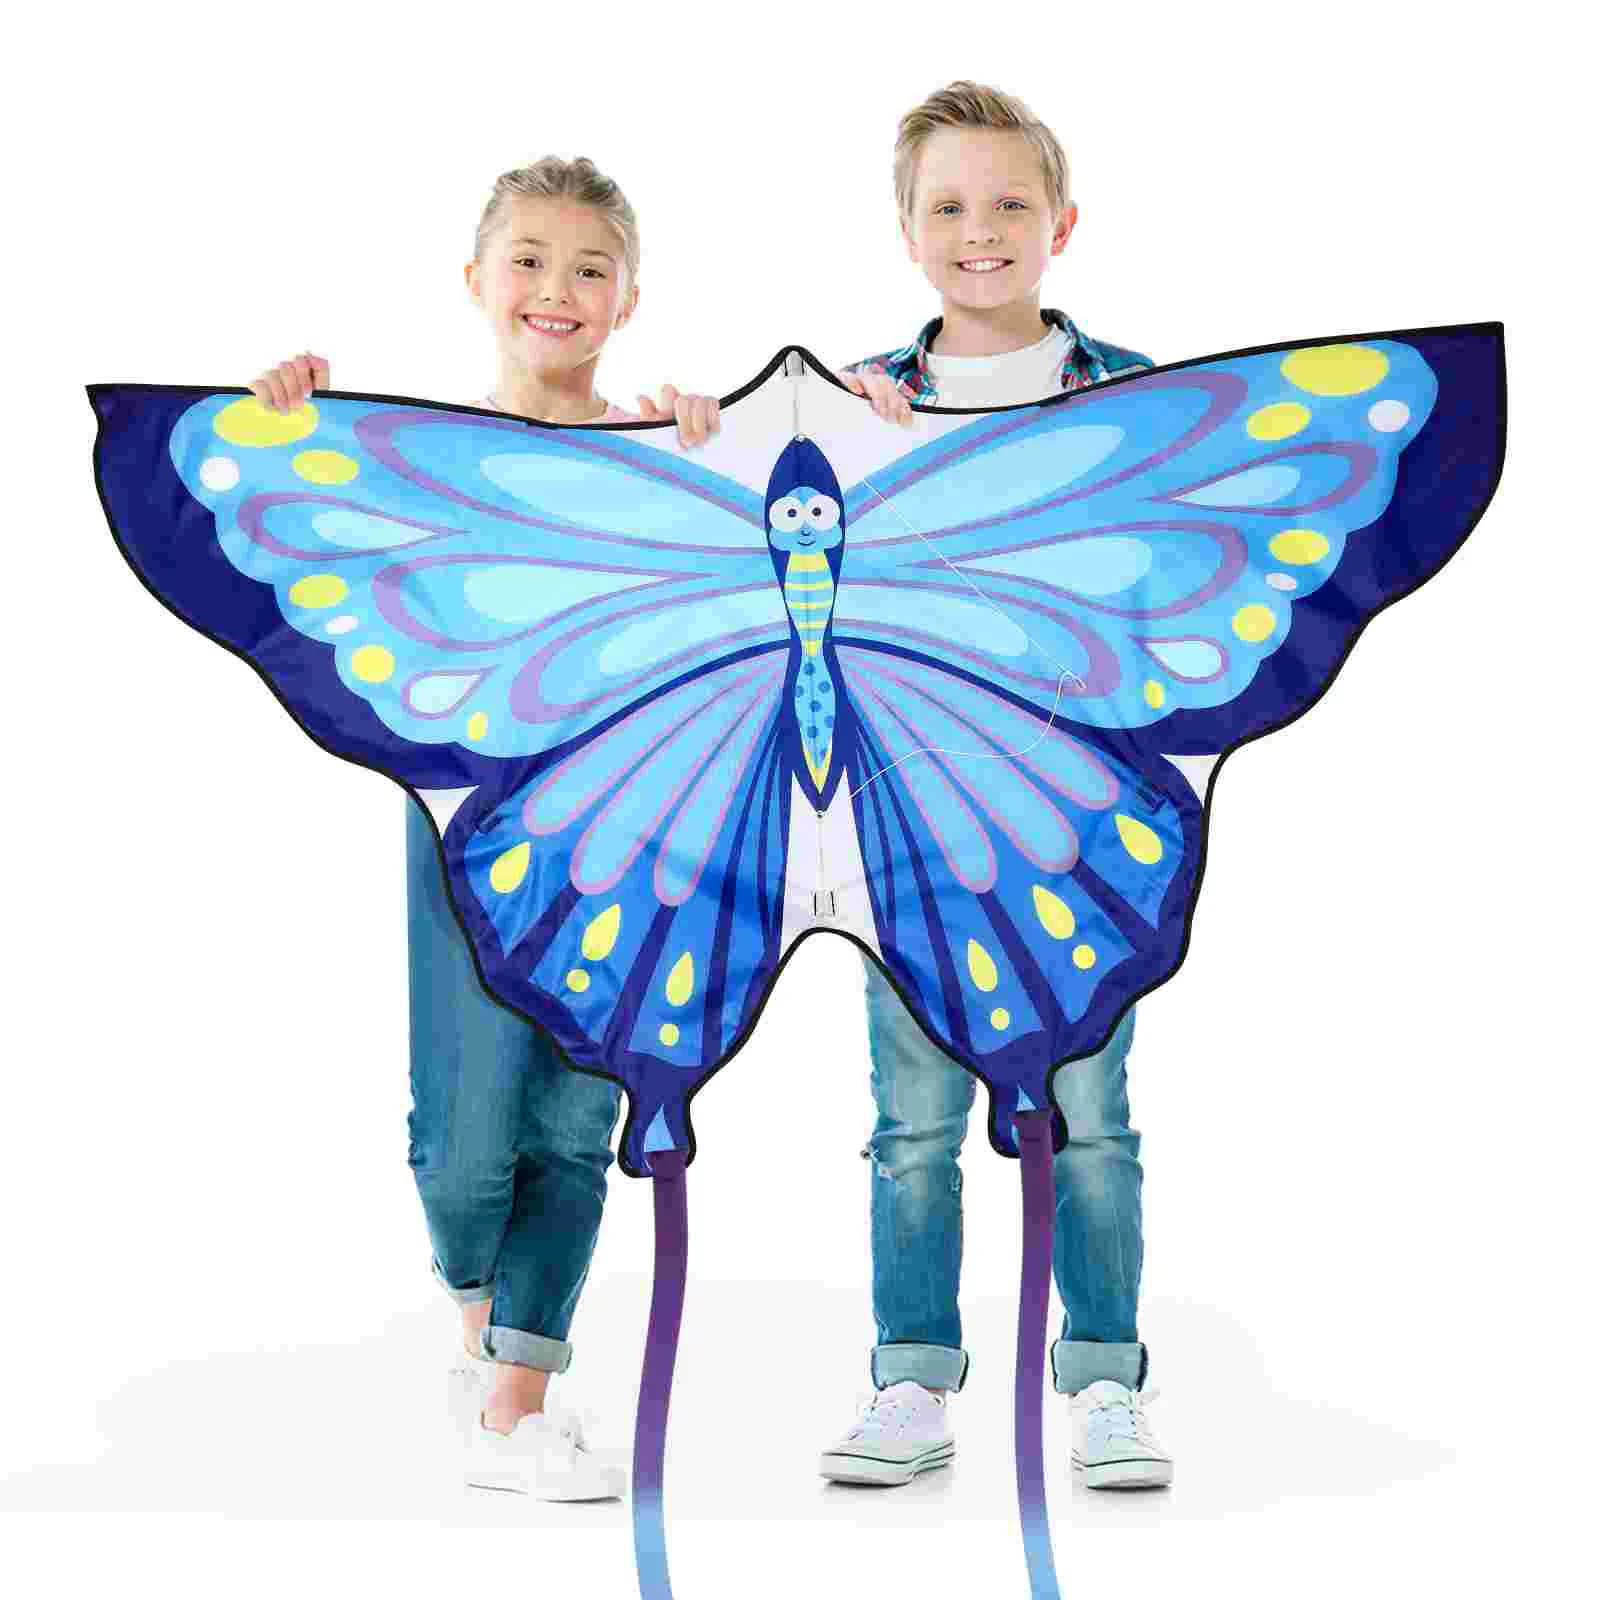 

Clispeed Kids Flying Kite Colorful Kite Amazing Charming Kite Comes with Flying String for Family Trip